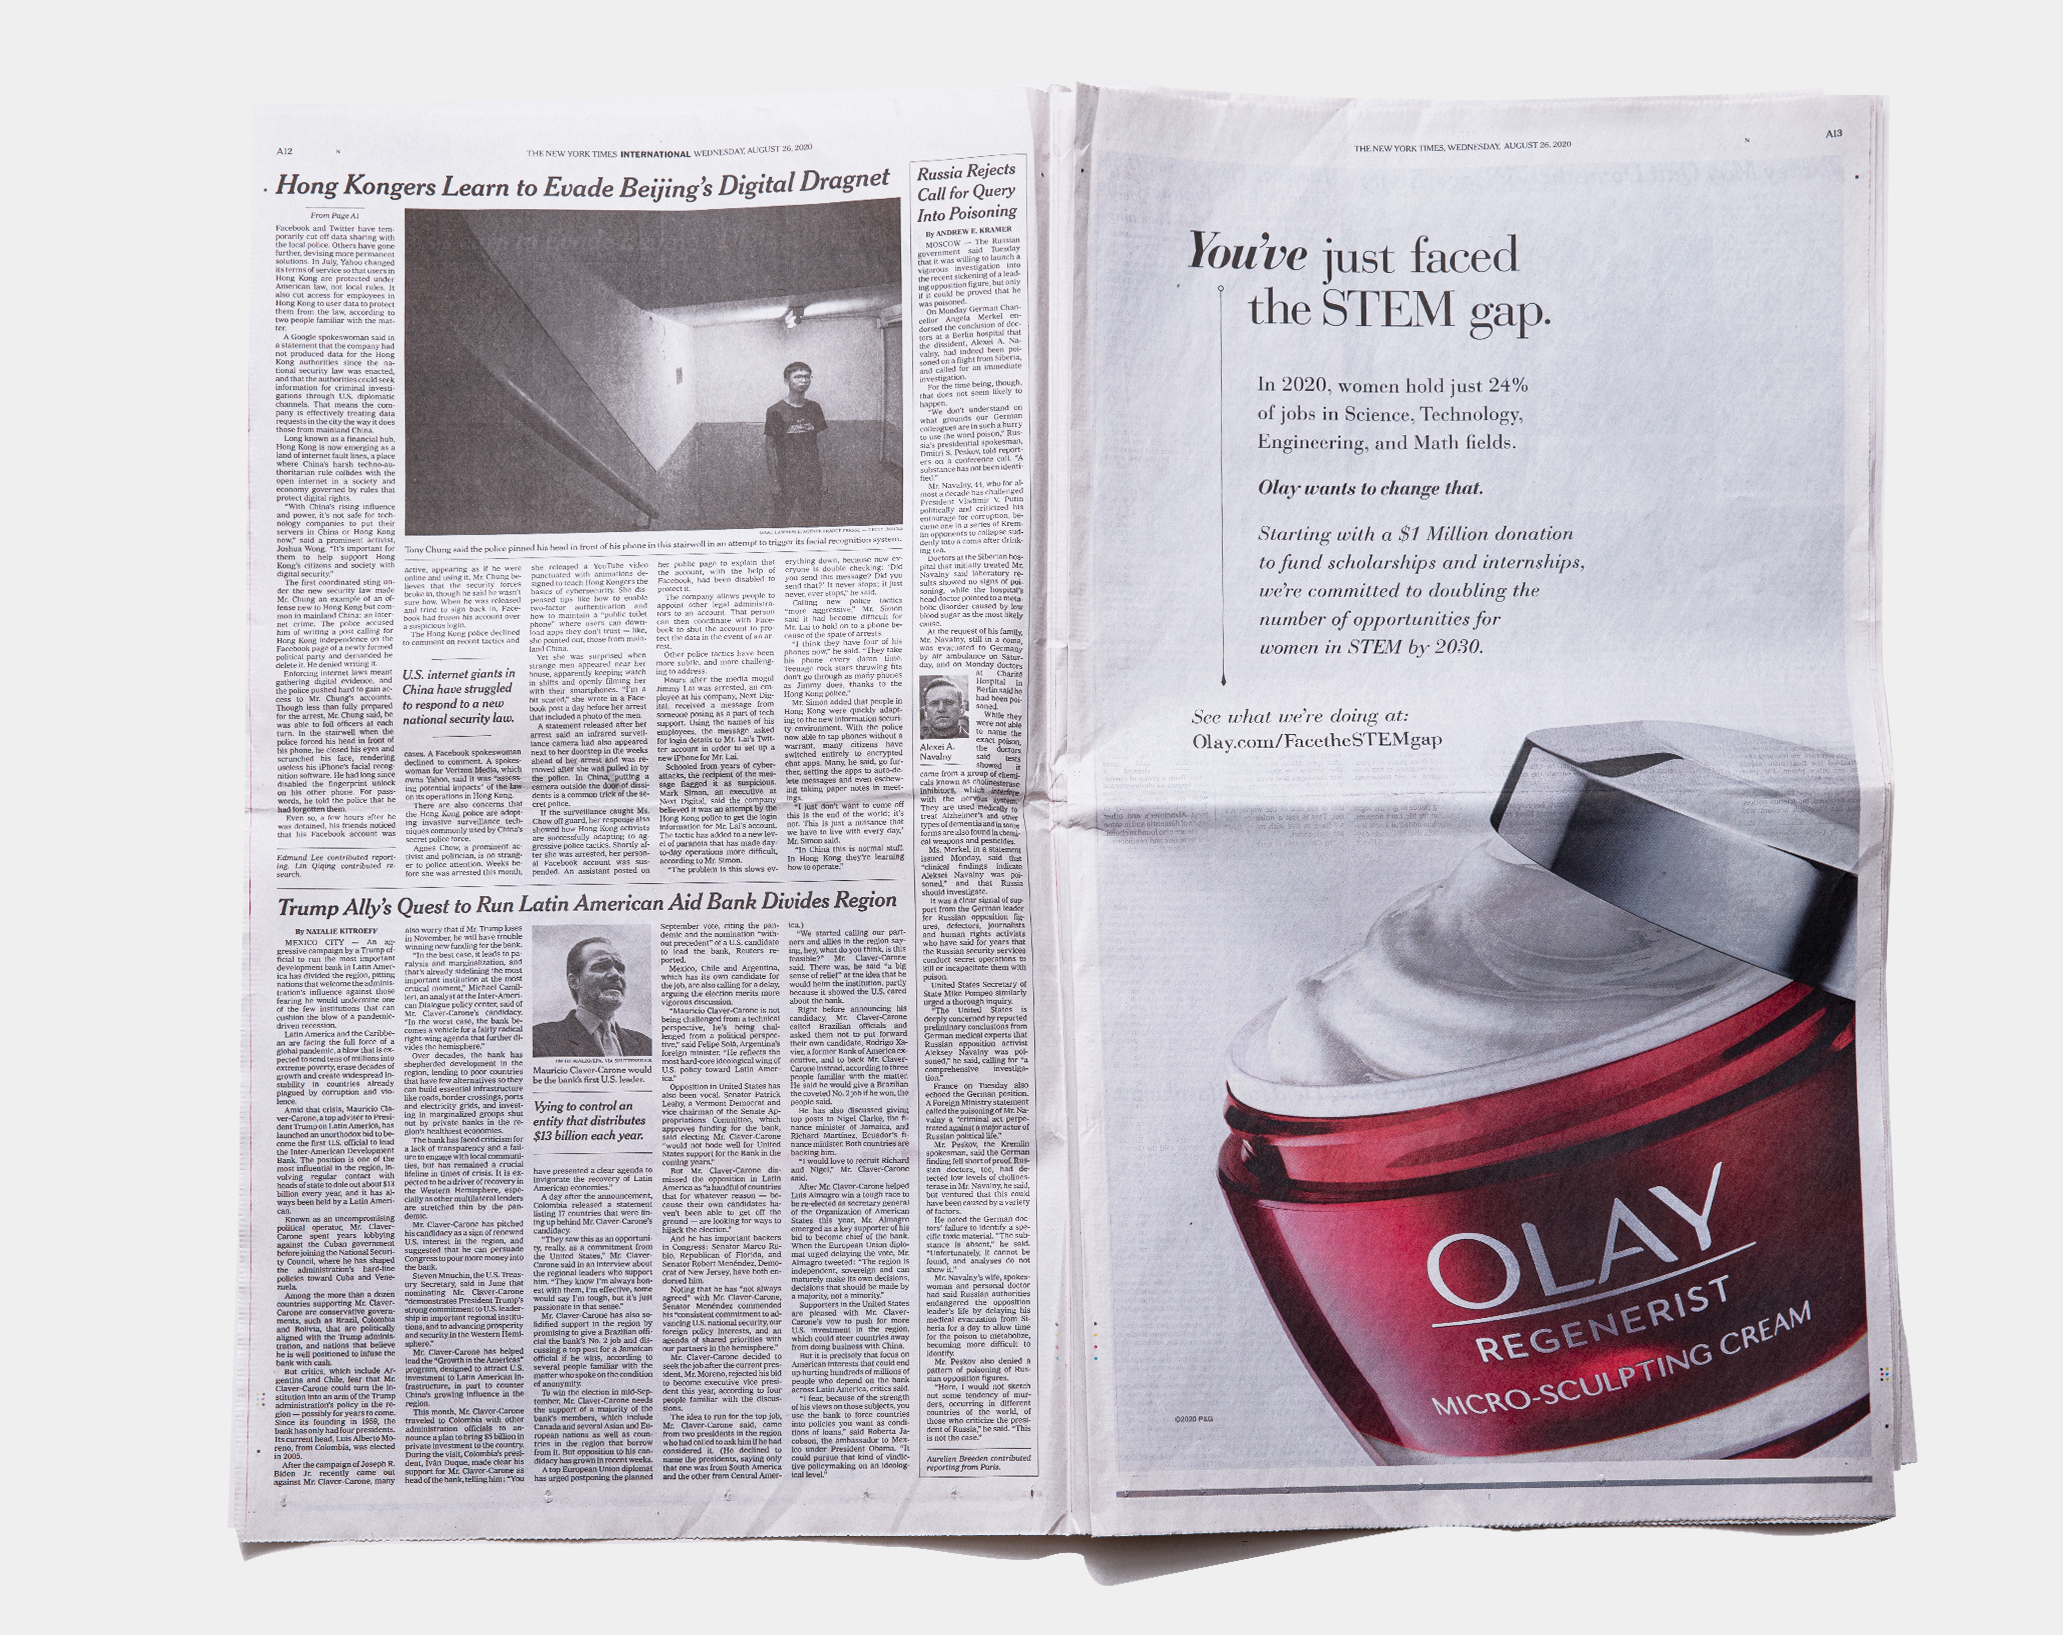 Olay NYT 4.png